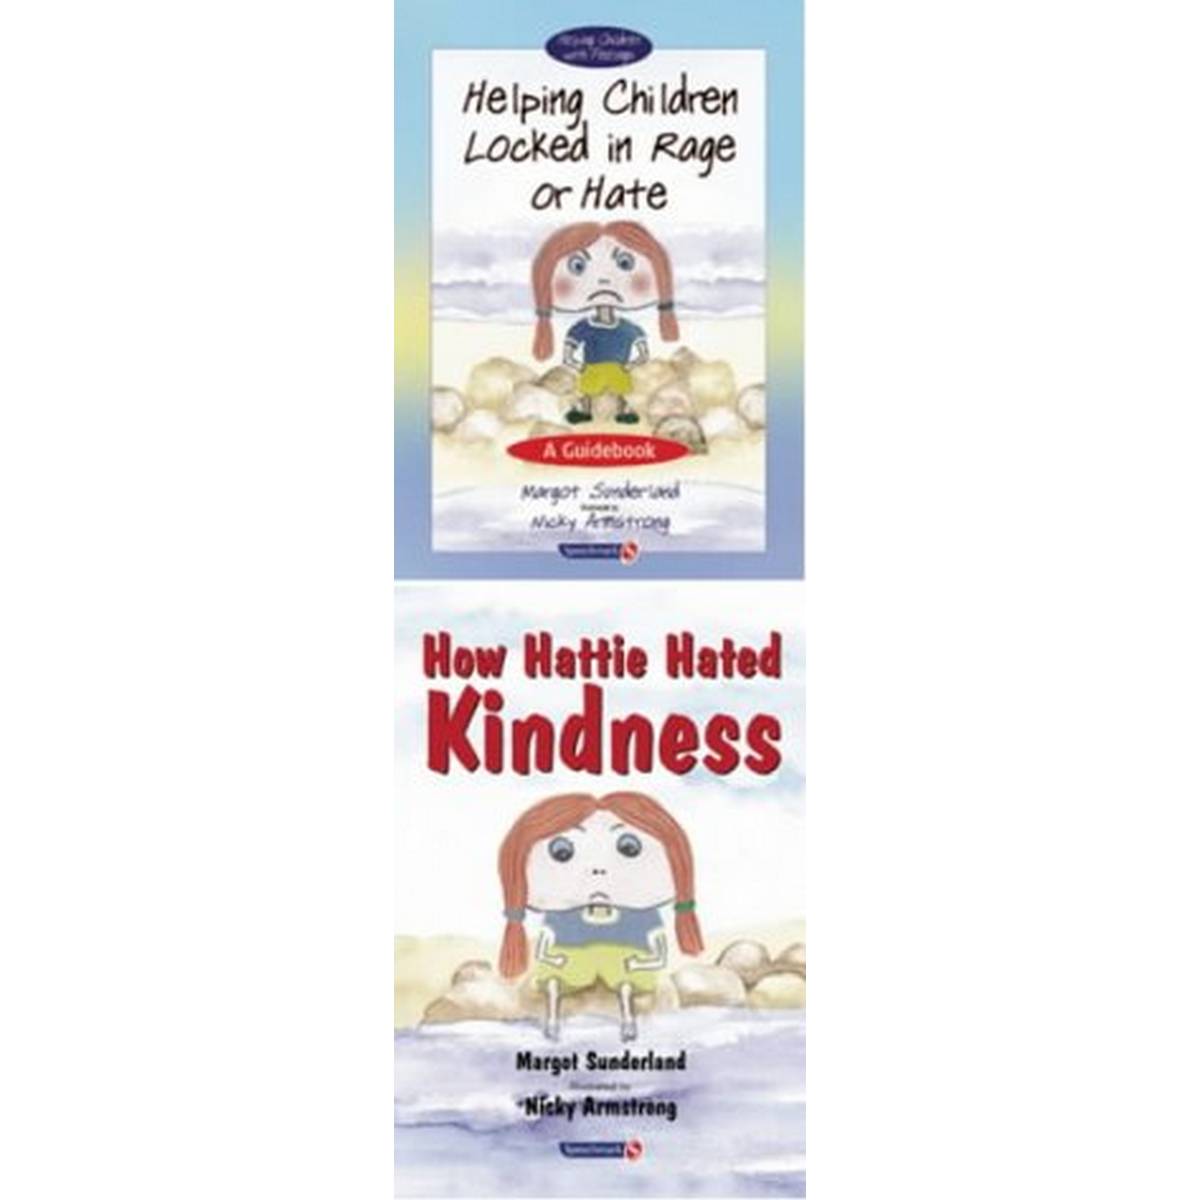 Helping Children Locked in Rage or Hate & How Hatie Hated